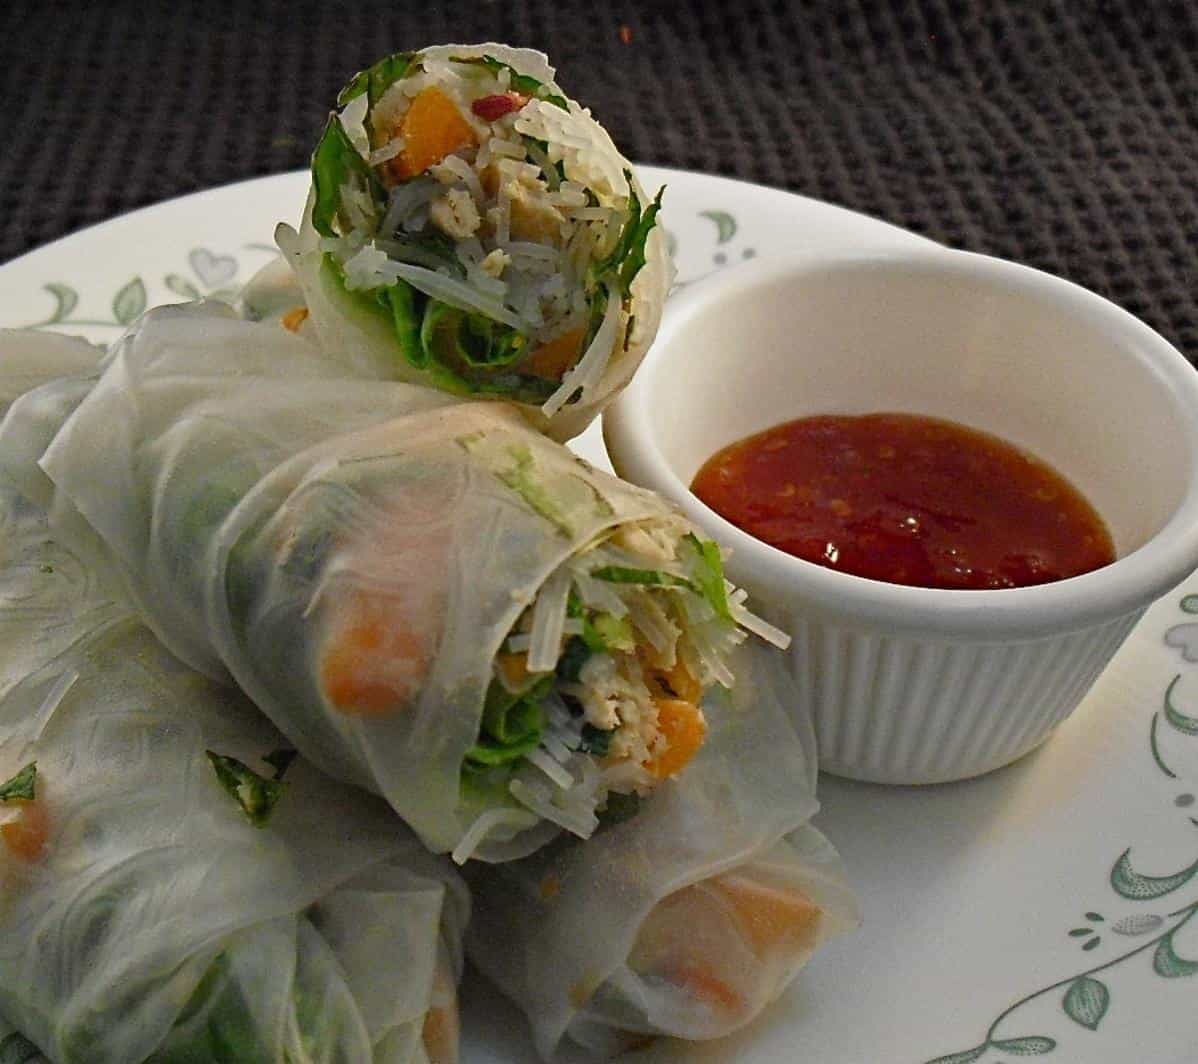  These spring rolls are perfect for a light lunch or an appetizer for any dinner party.